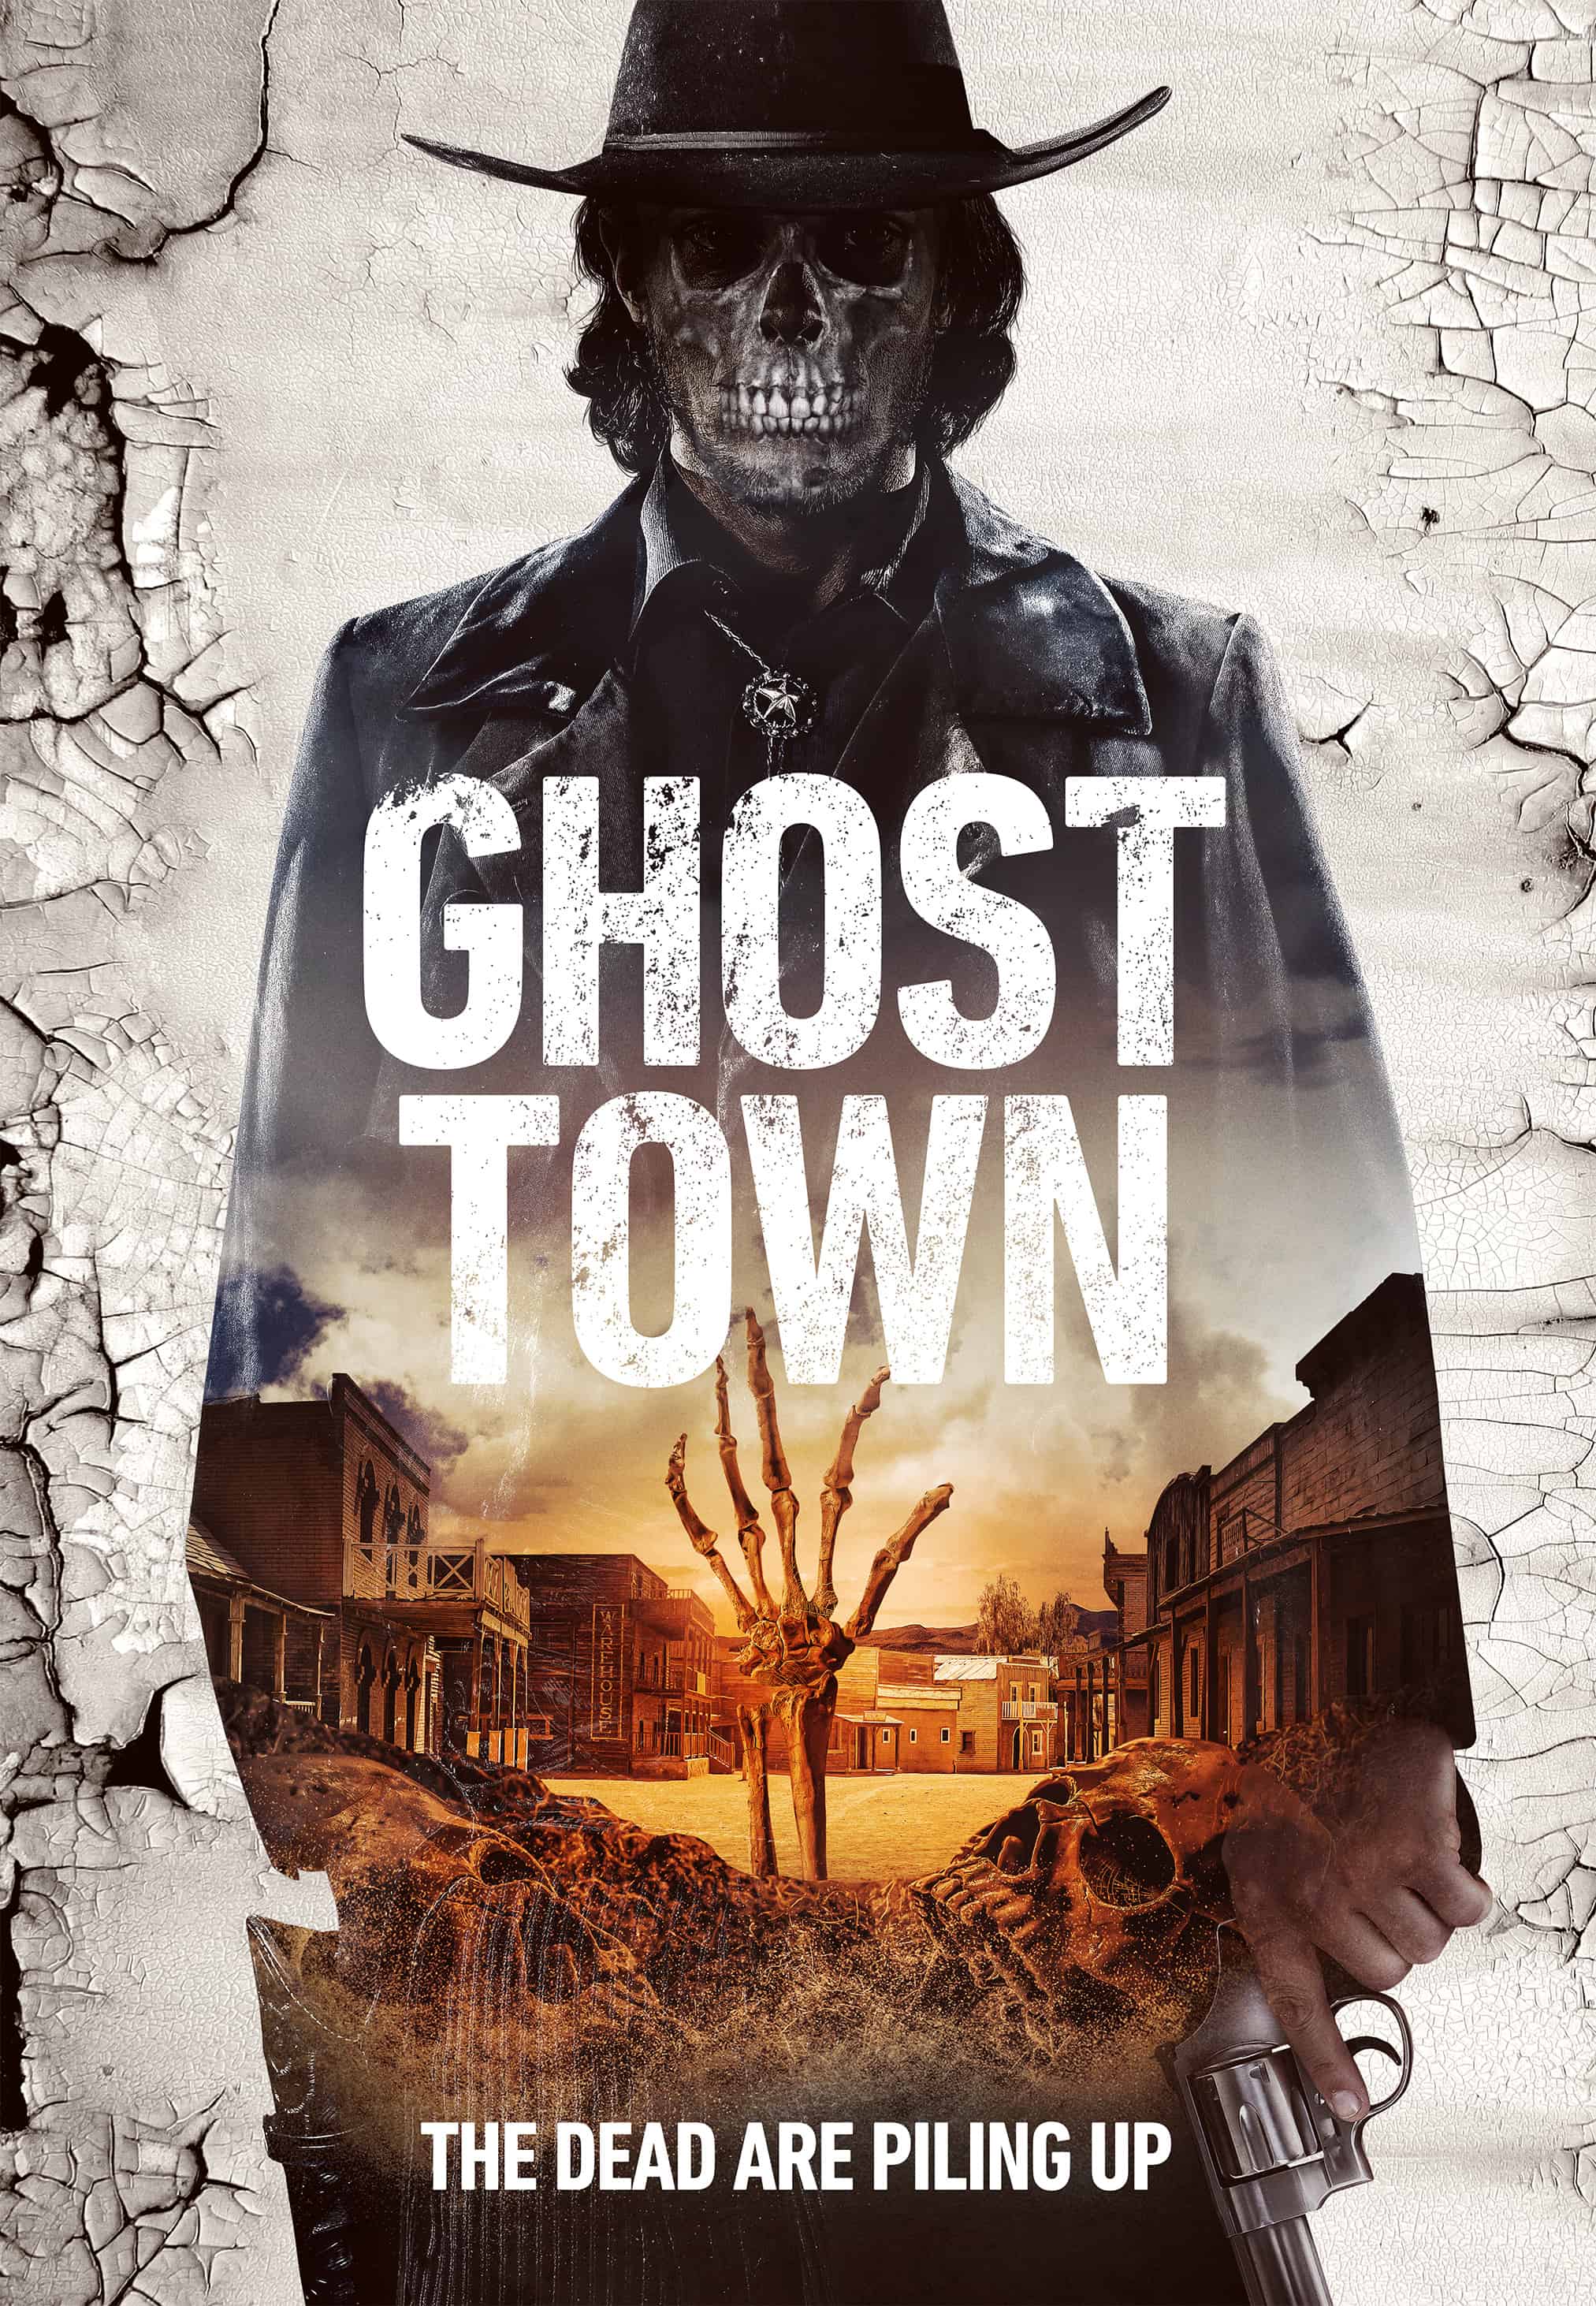 Ghost Town offers up a poster and trailer arrives March 7th 16